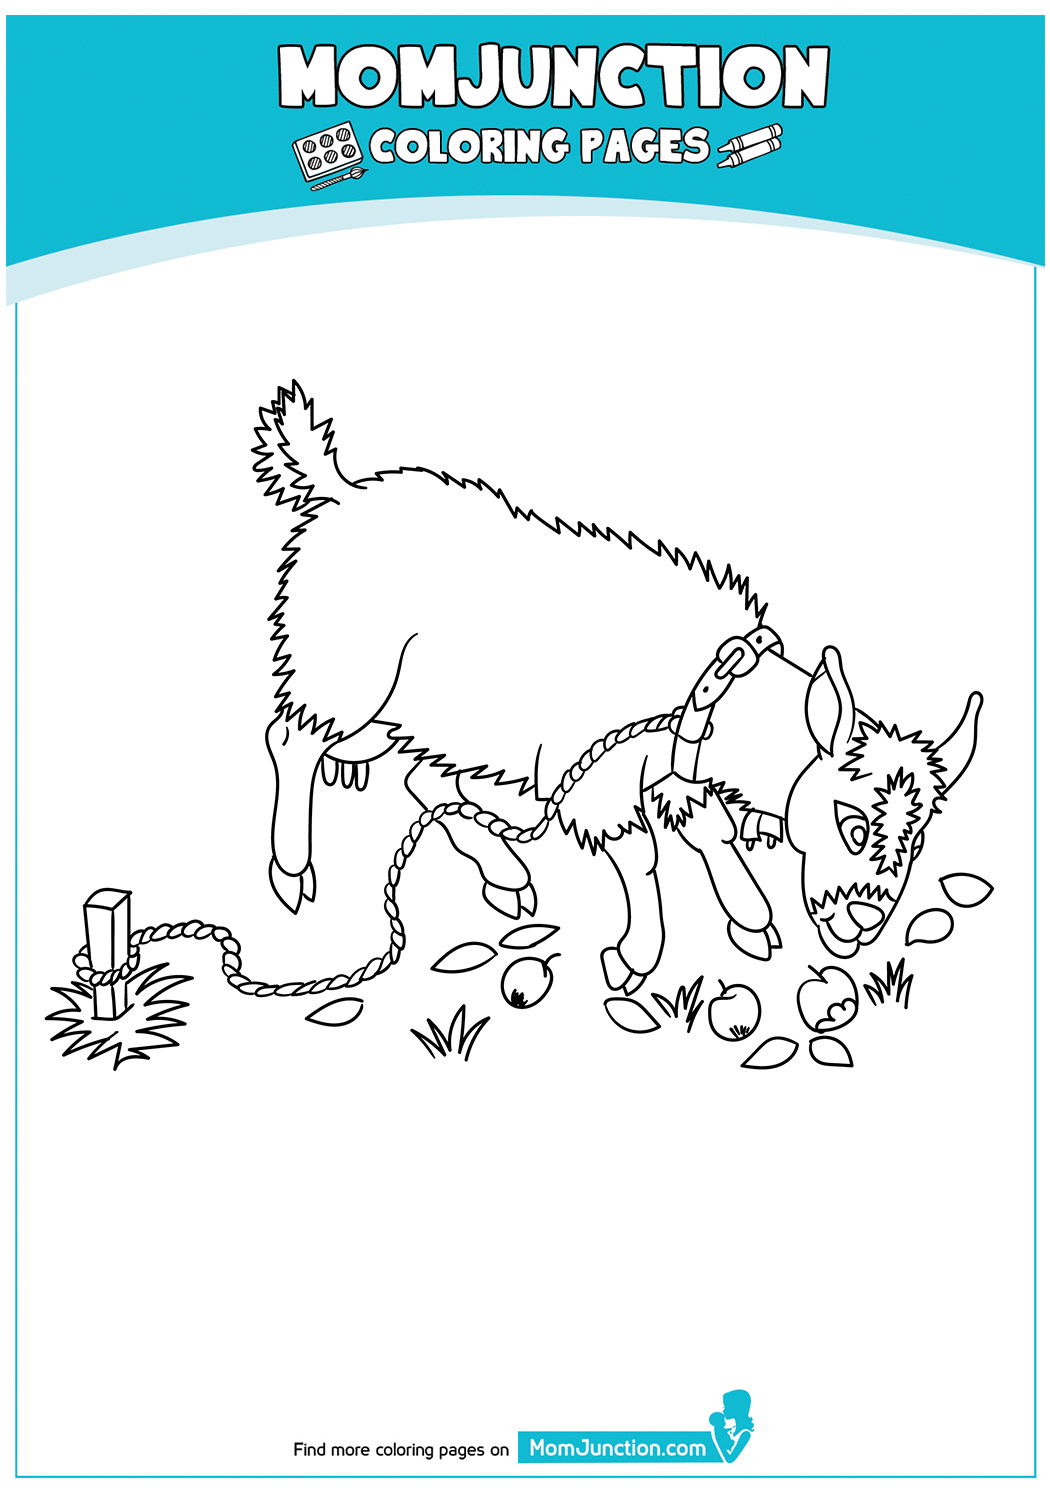 A-goat-coloring-page-Fri-17